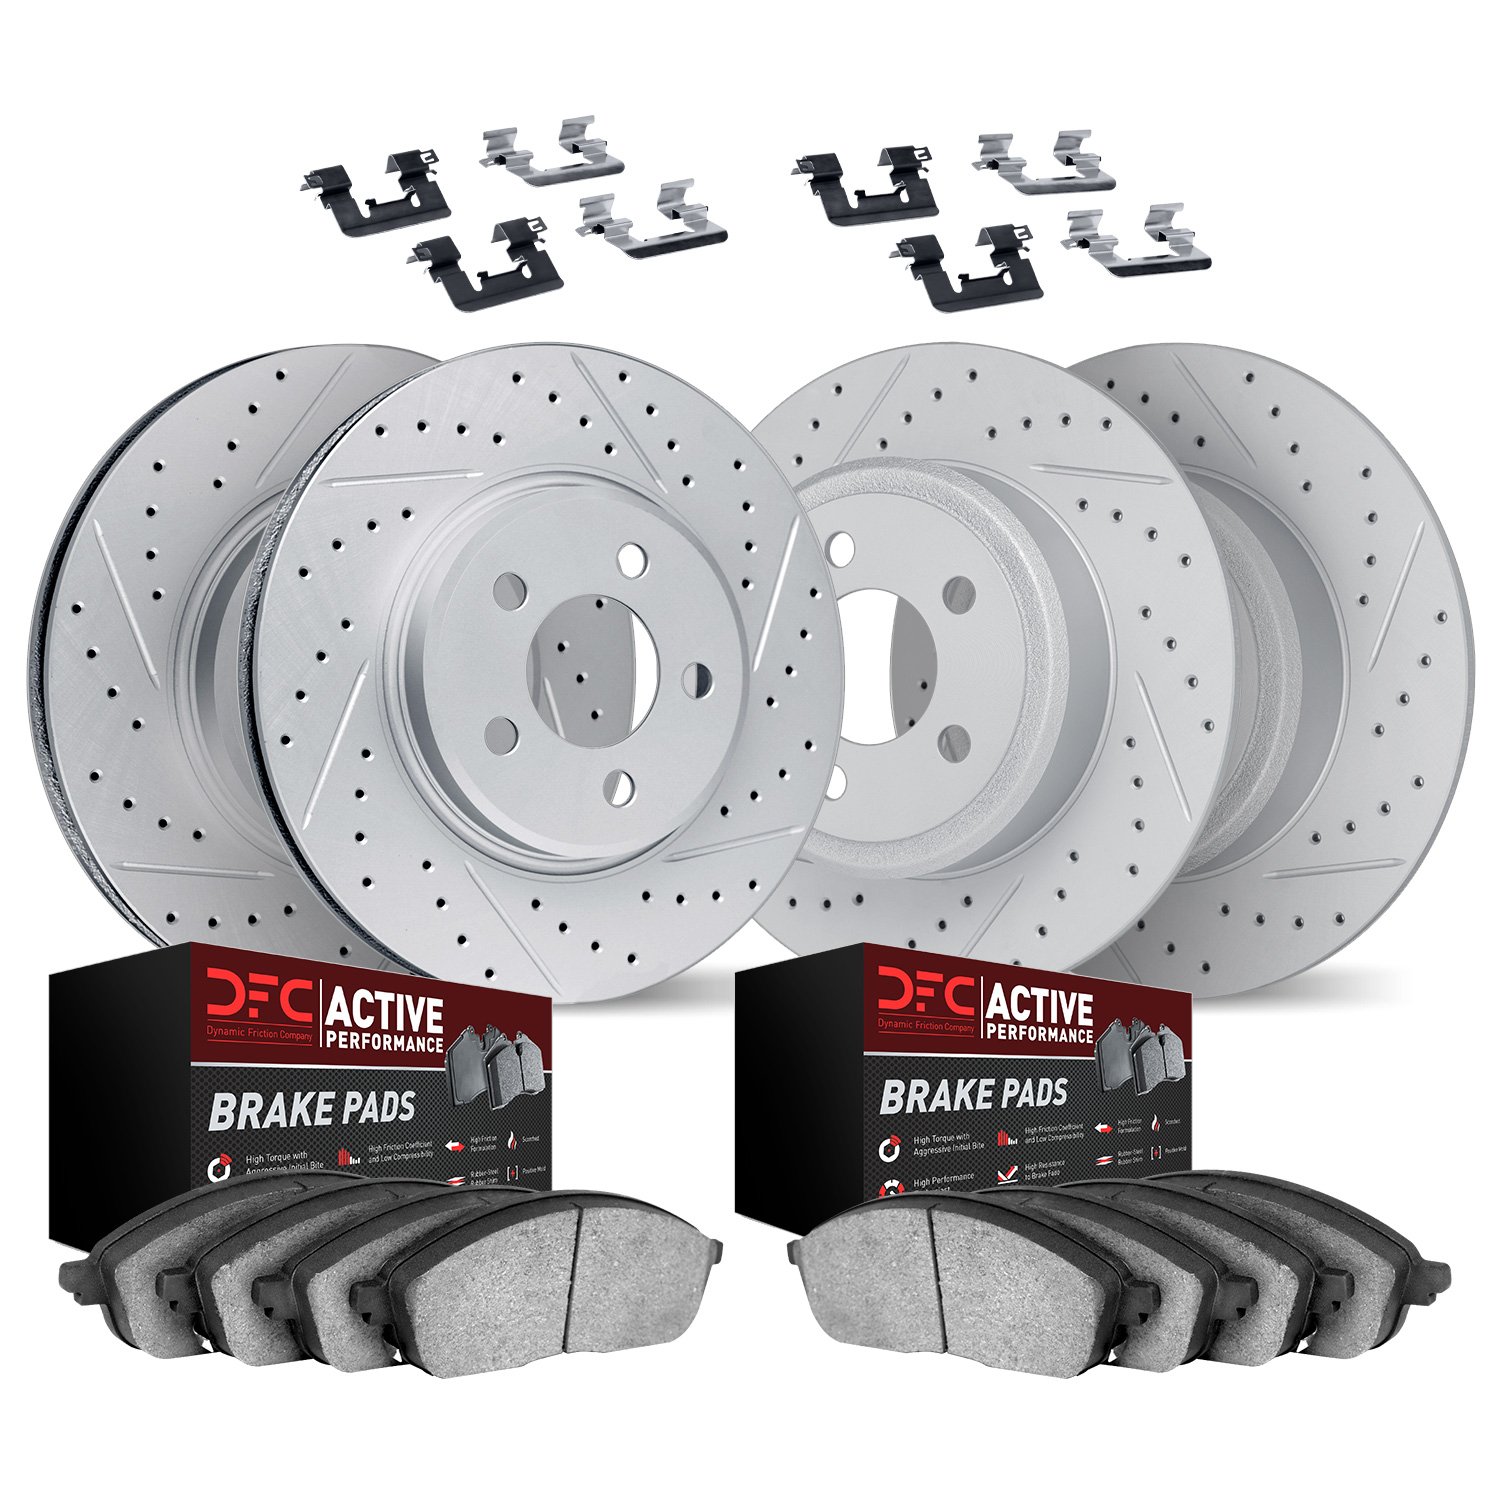 2714-54030 Geoperformance Drilled/Slotted Brake Rotors with Active Performance Pads Kit & Hardware, 2013-2018 Ford/Lincoln/Mercu